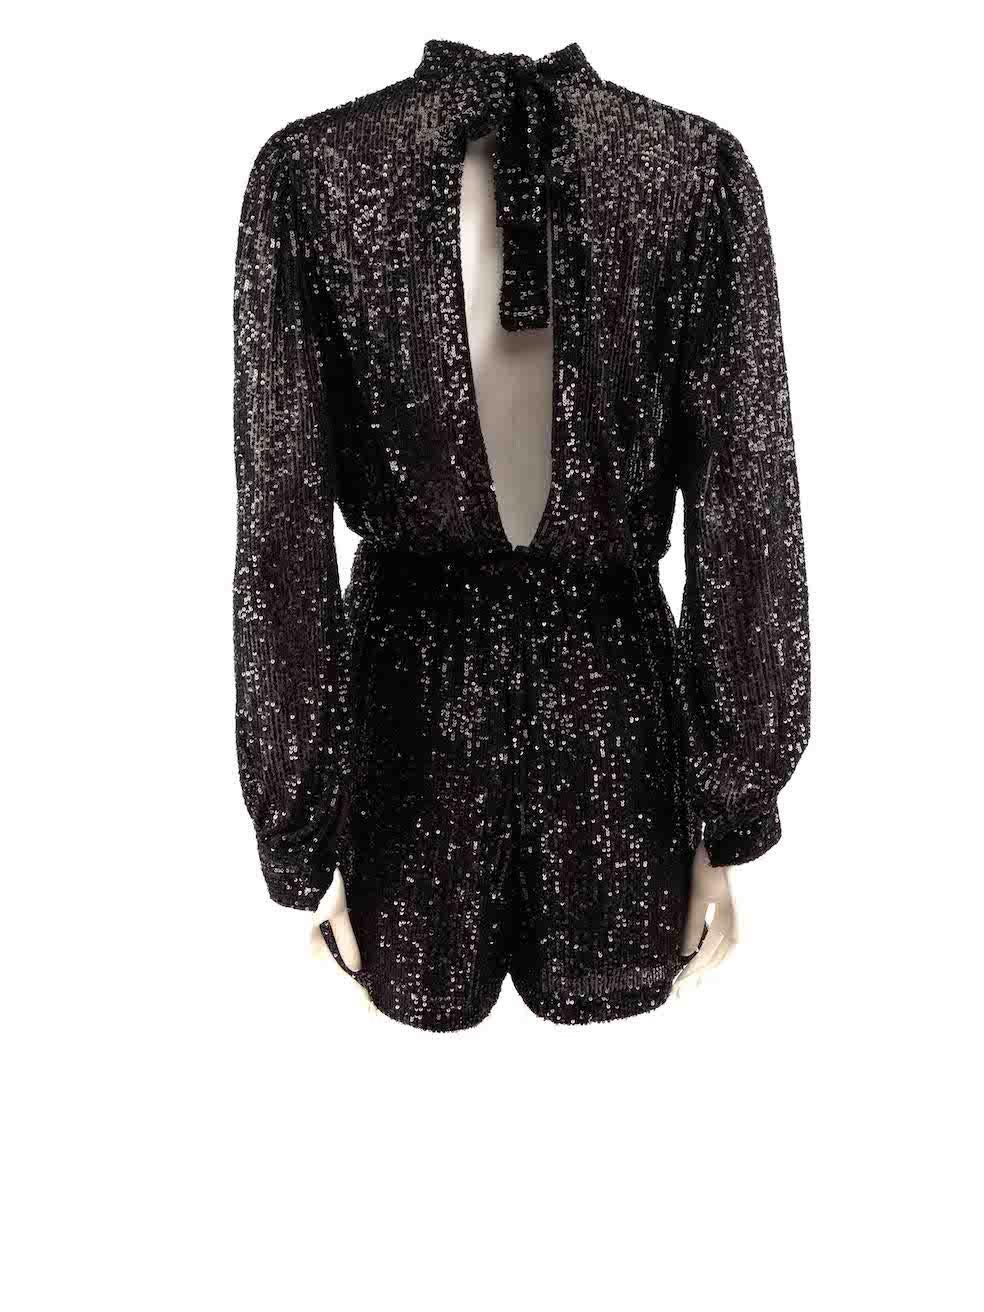 Maje Black Sequinned Backless Playsuit Size S In Good Condition For Sale In London, GB